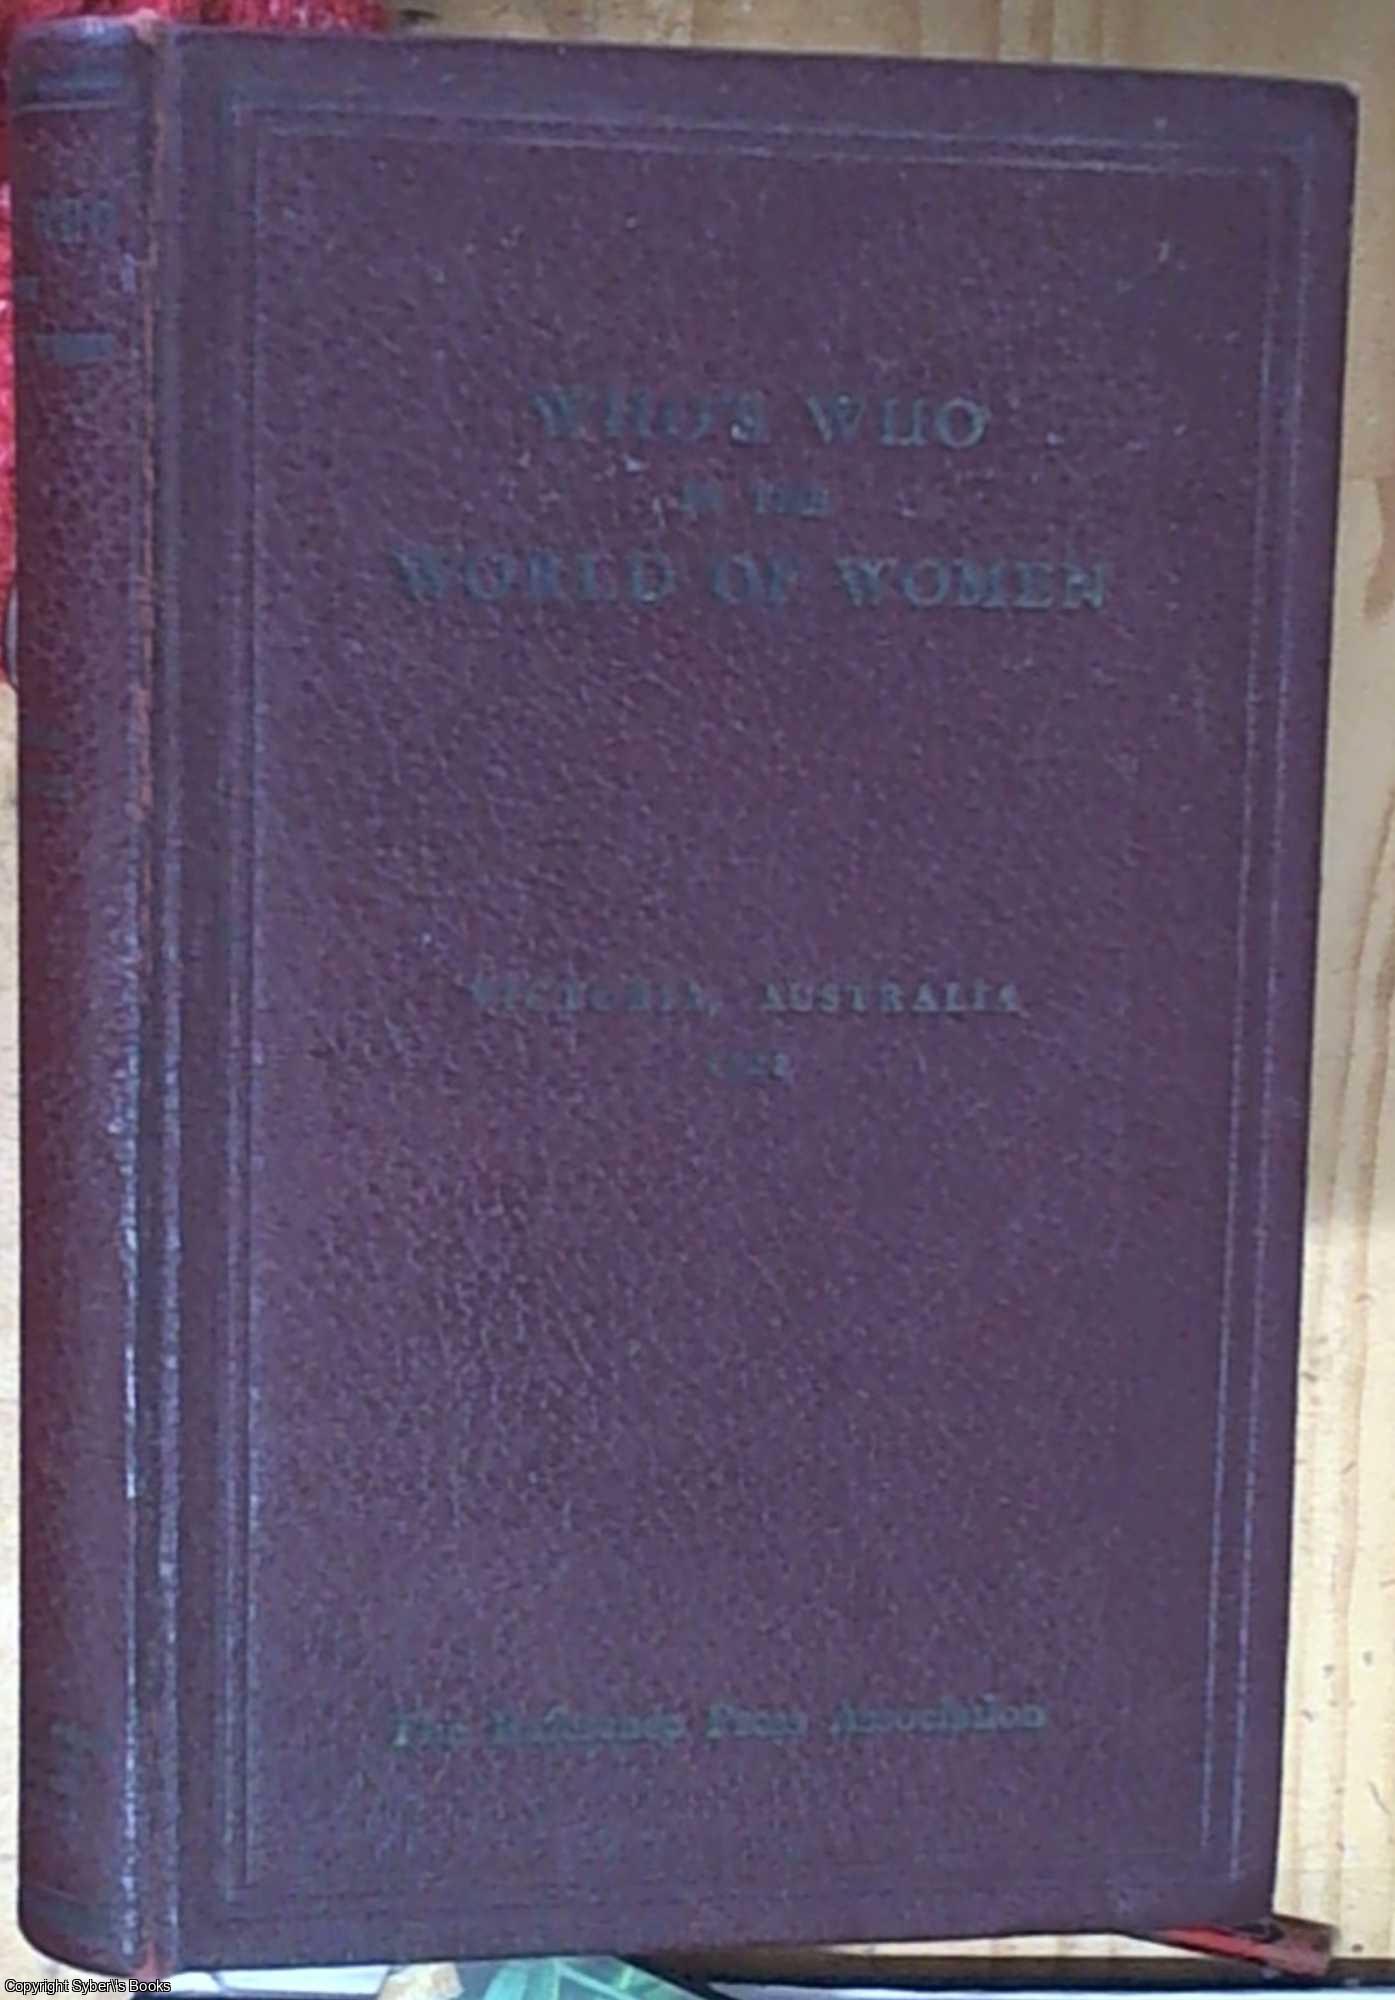 Not Stated - Who's Who in the World of Women: Victoria, Australia. Cententary Edition. Vol II, 1934. A representation of Every Sphere showing Activities and Interests, social - philanthropic, historic - scholastic, sport and travel